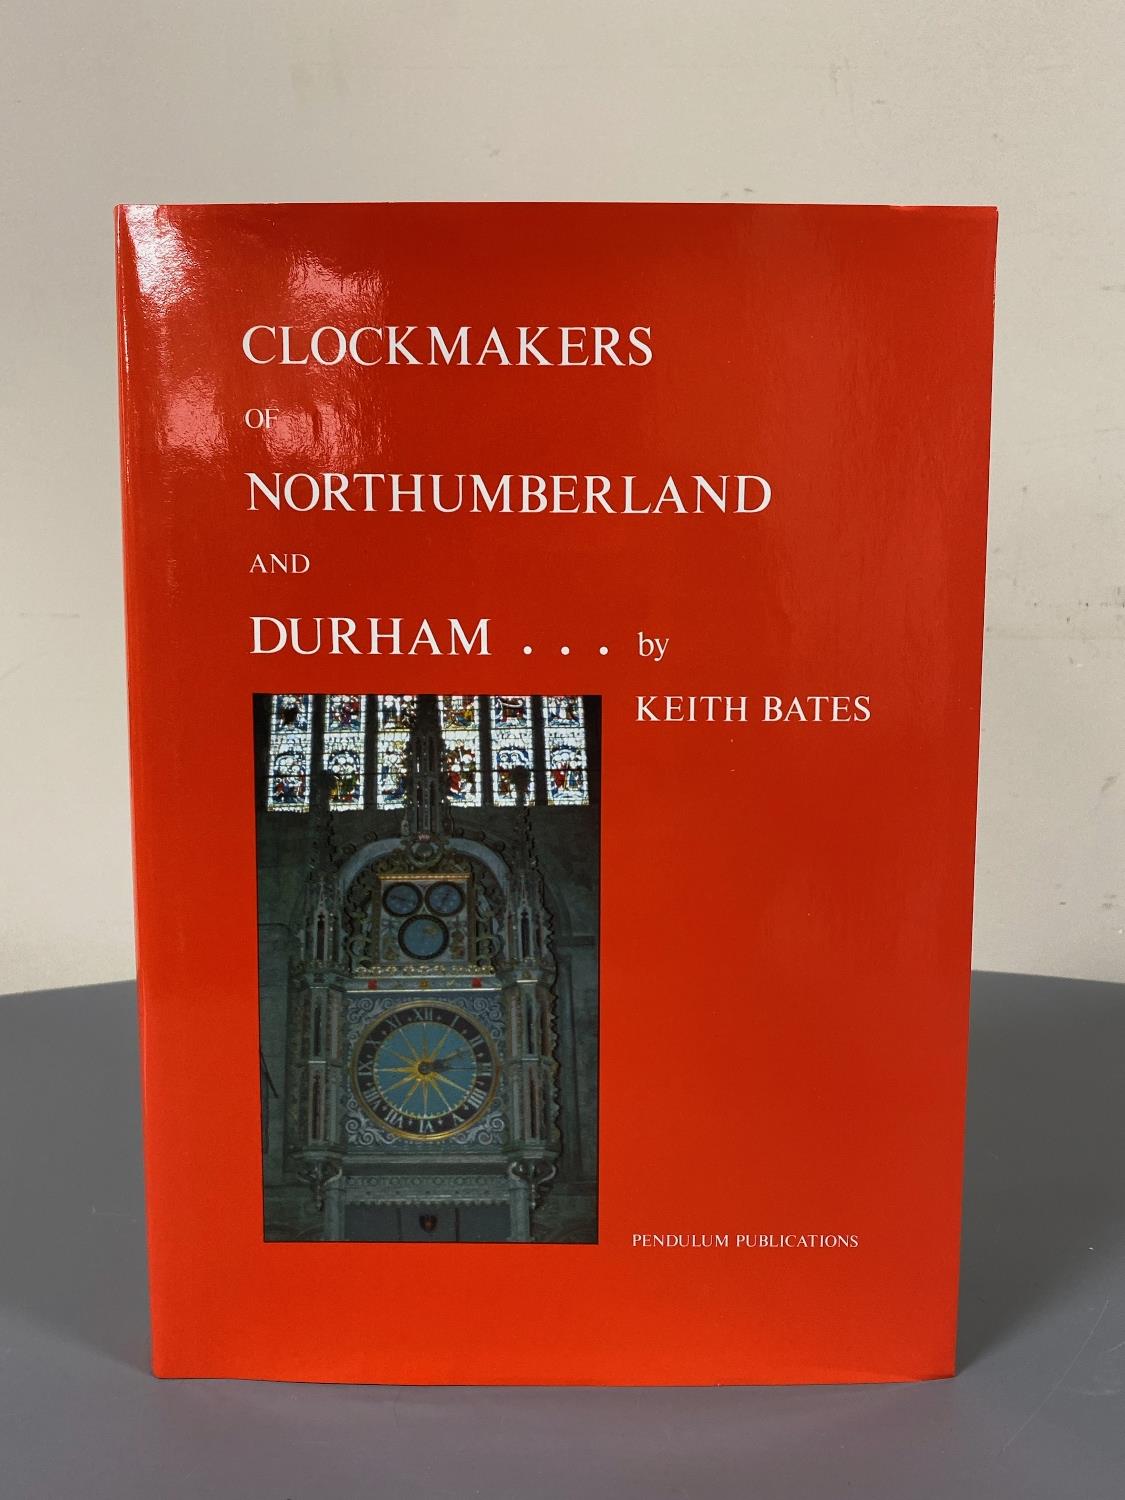 Keith Bates : The Clockmakers of Northumberland and Durham, a volume, hardcover, 303 pages,